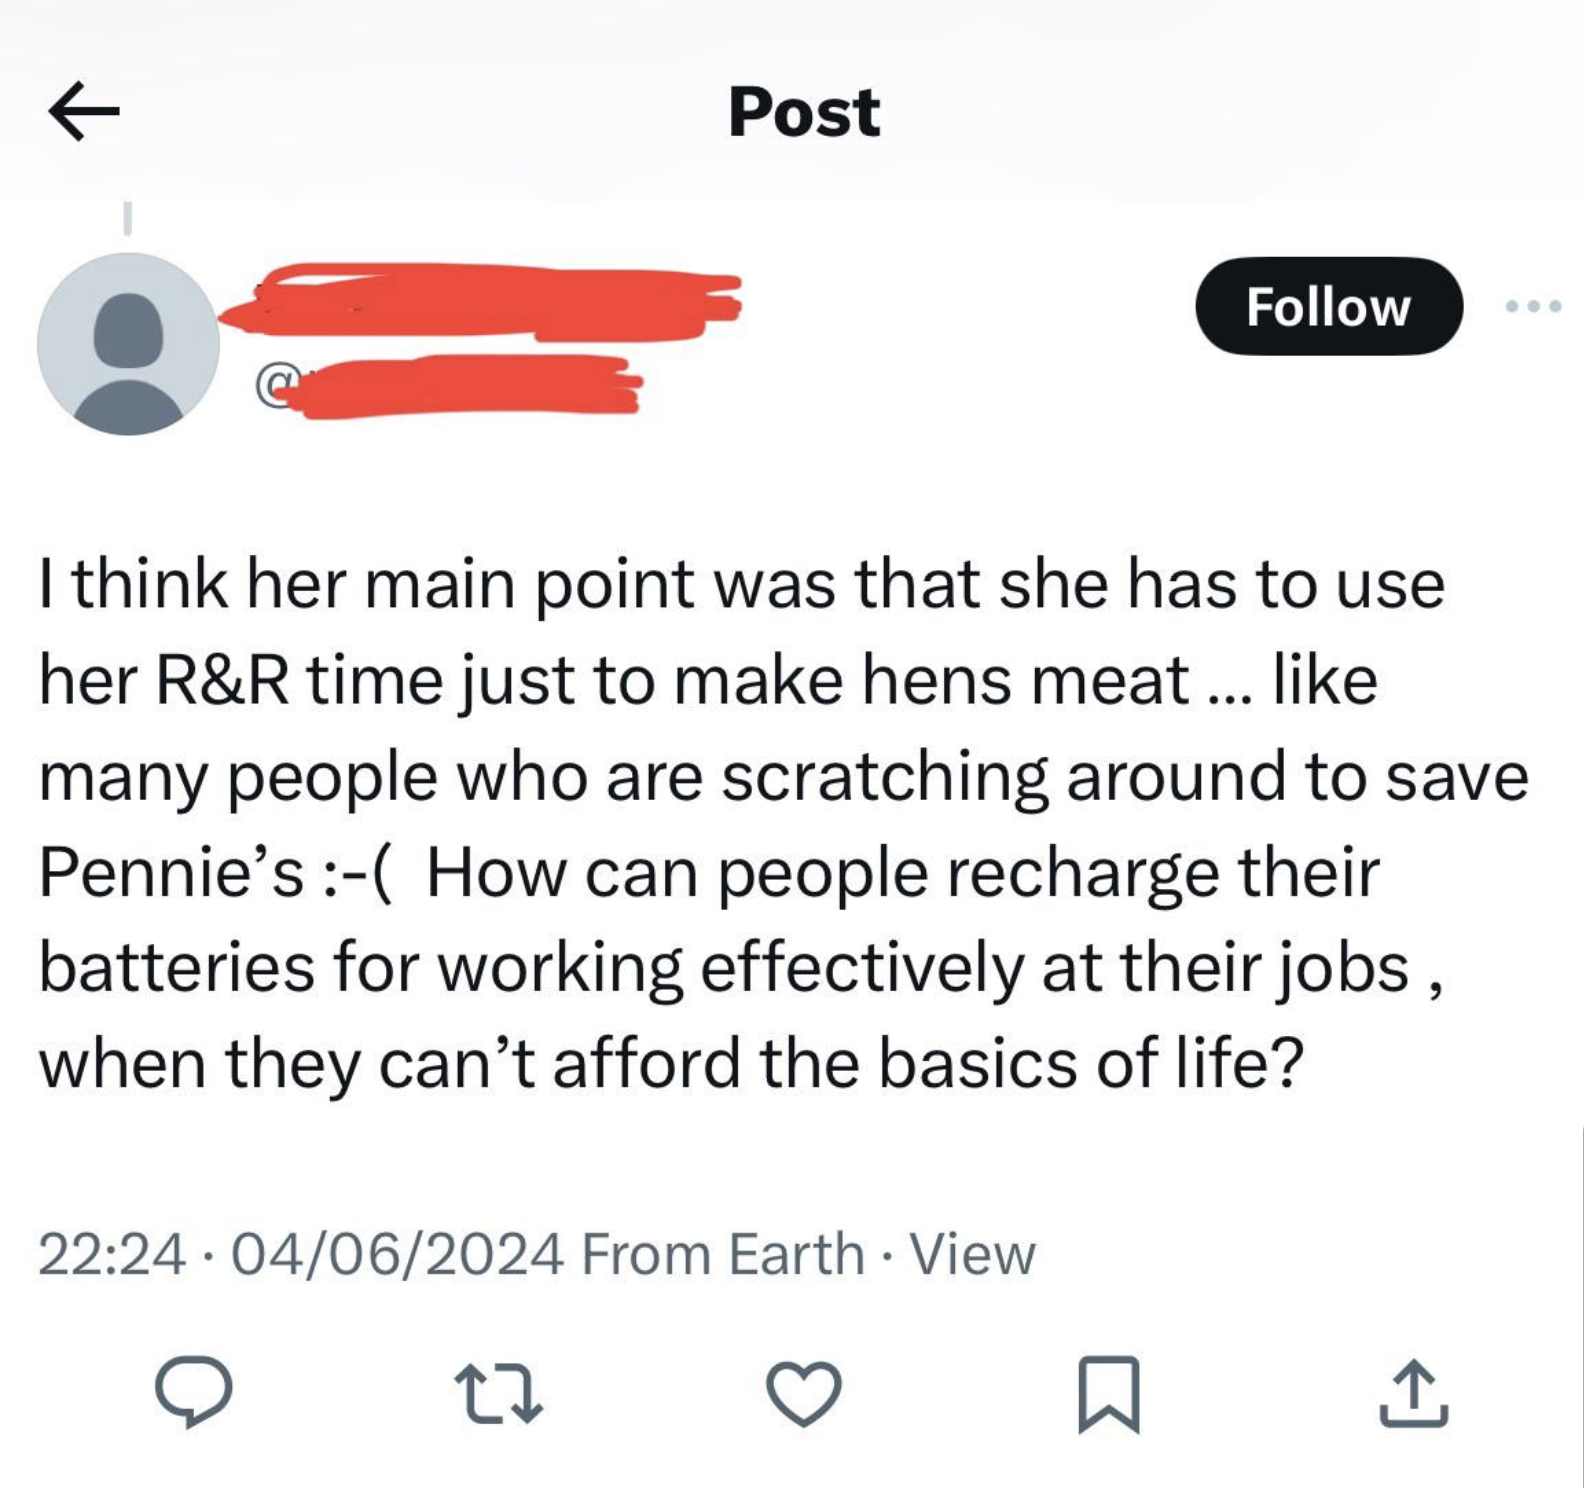 screenshot - Post I think her main point was that she has to use her R&R time just to make hens meat... many people who are scratching around to save Pennie's How can people recharge their batteries for working effectively at their jobs, when they can't a